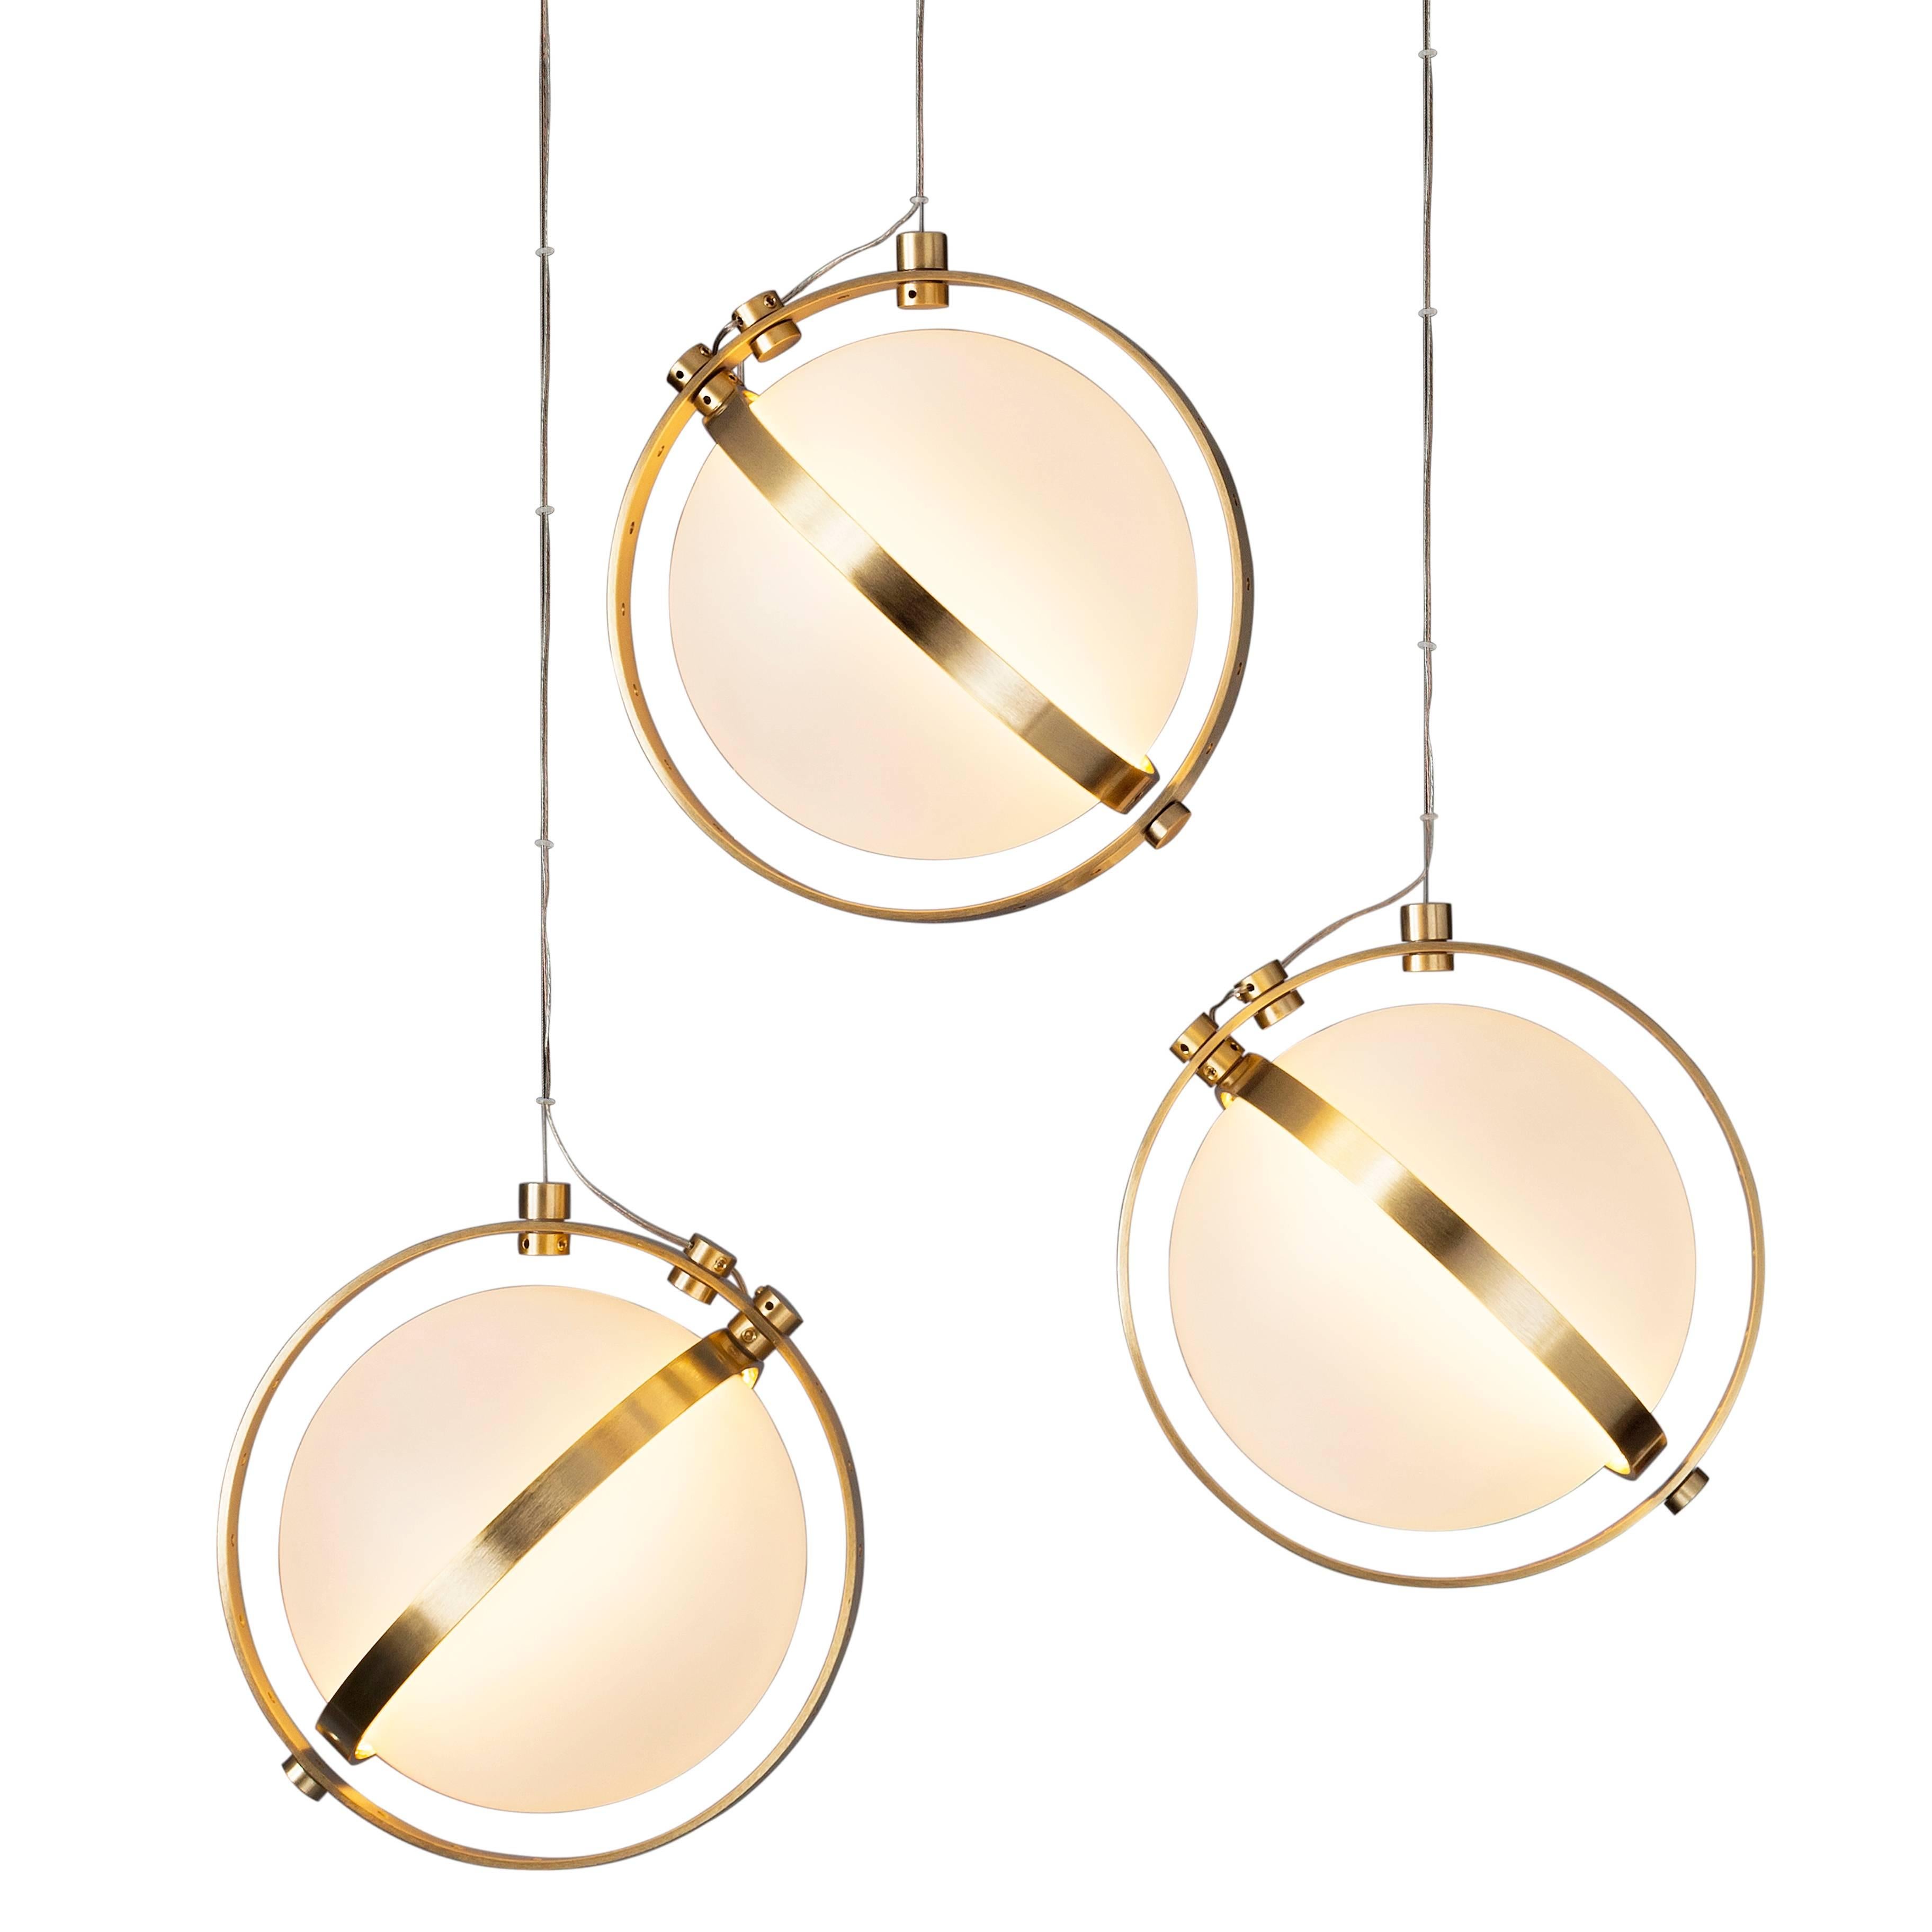 Vega is the latest family in the evolution of the Flexus series by Baroncelli. 

Flexus is a lighting system that comprises a palette of abstracted lines, curves and circles. Echoing the language of Modernist modular thinking, it captures the desire